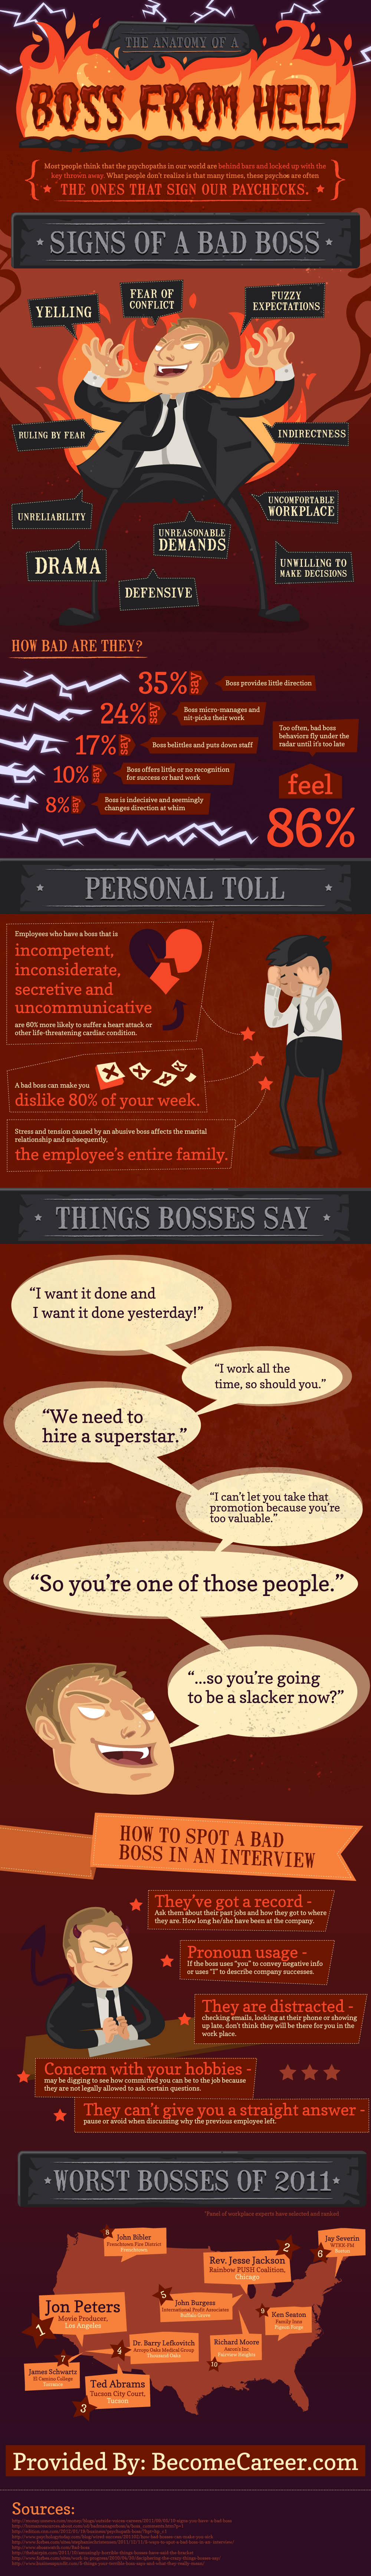 The Anatomy of a Boss from Hell